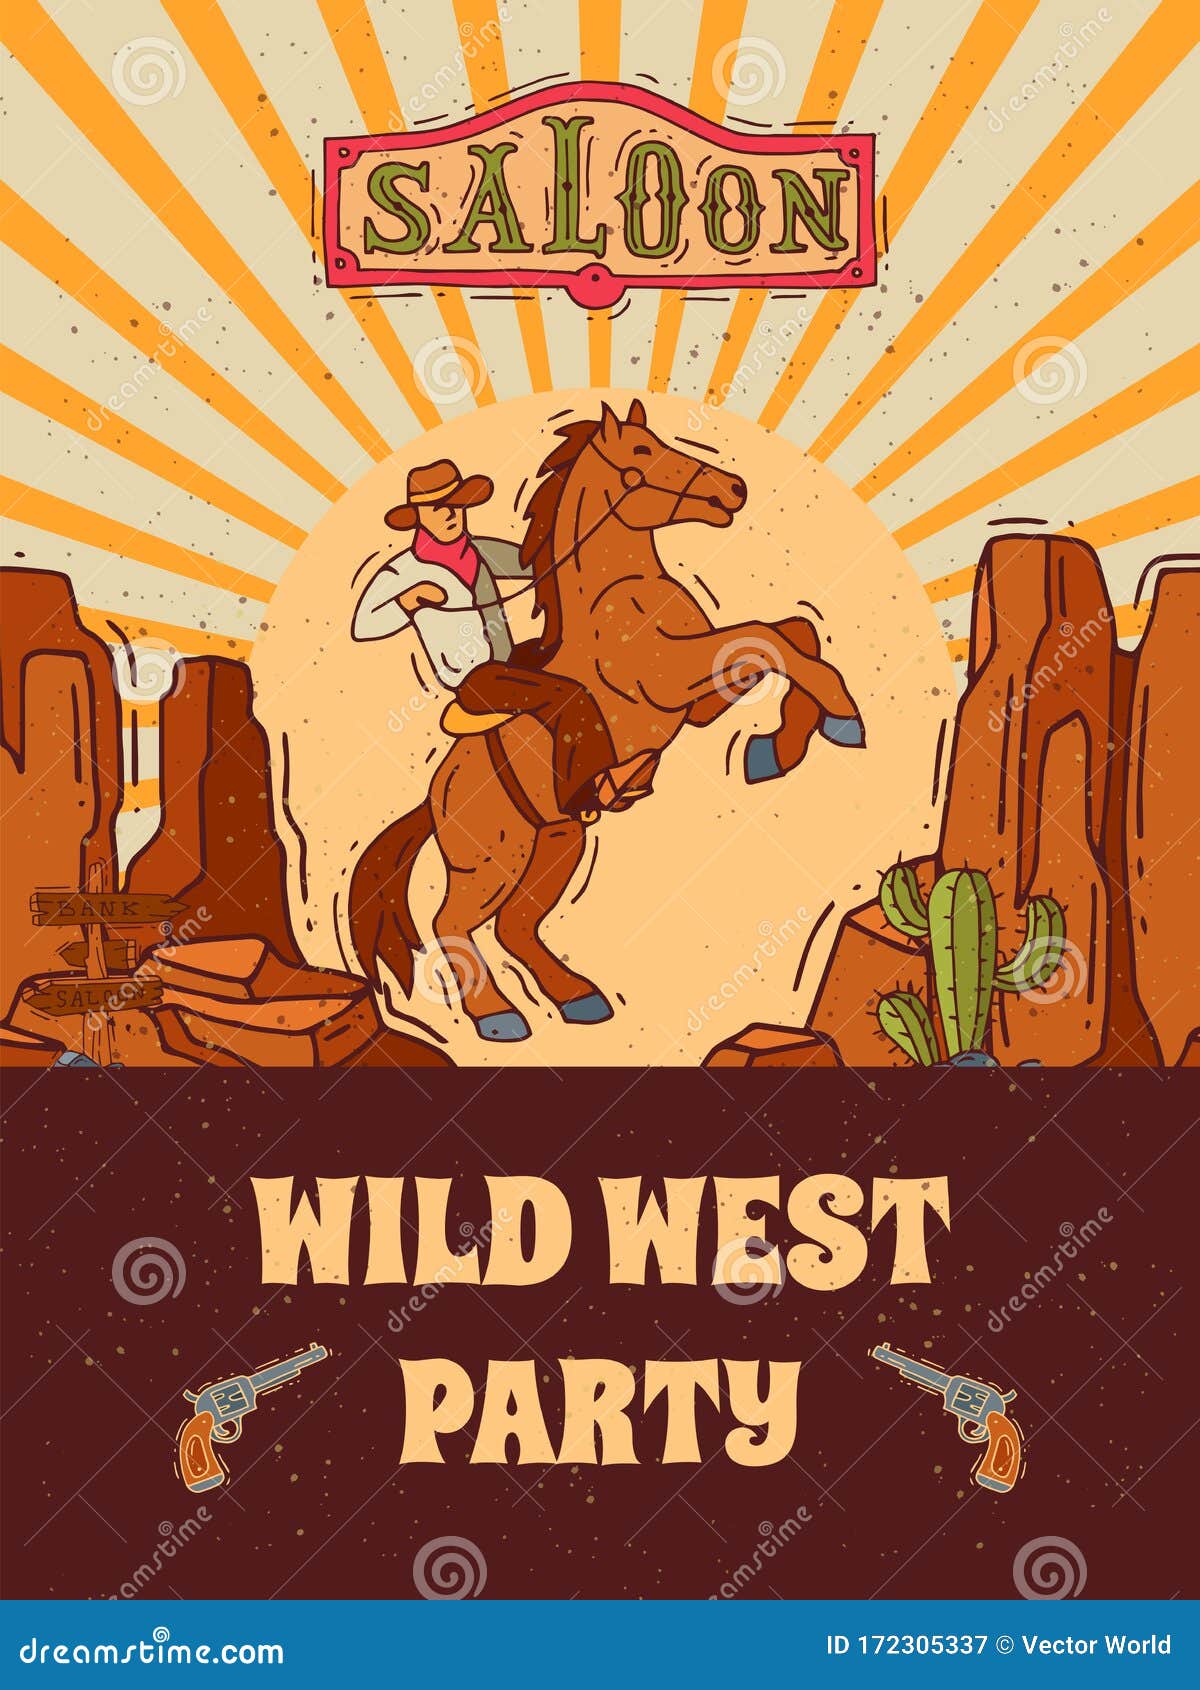 Western Poster Template